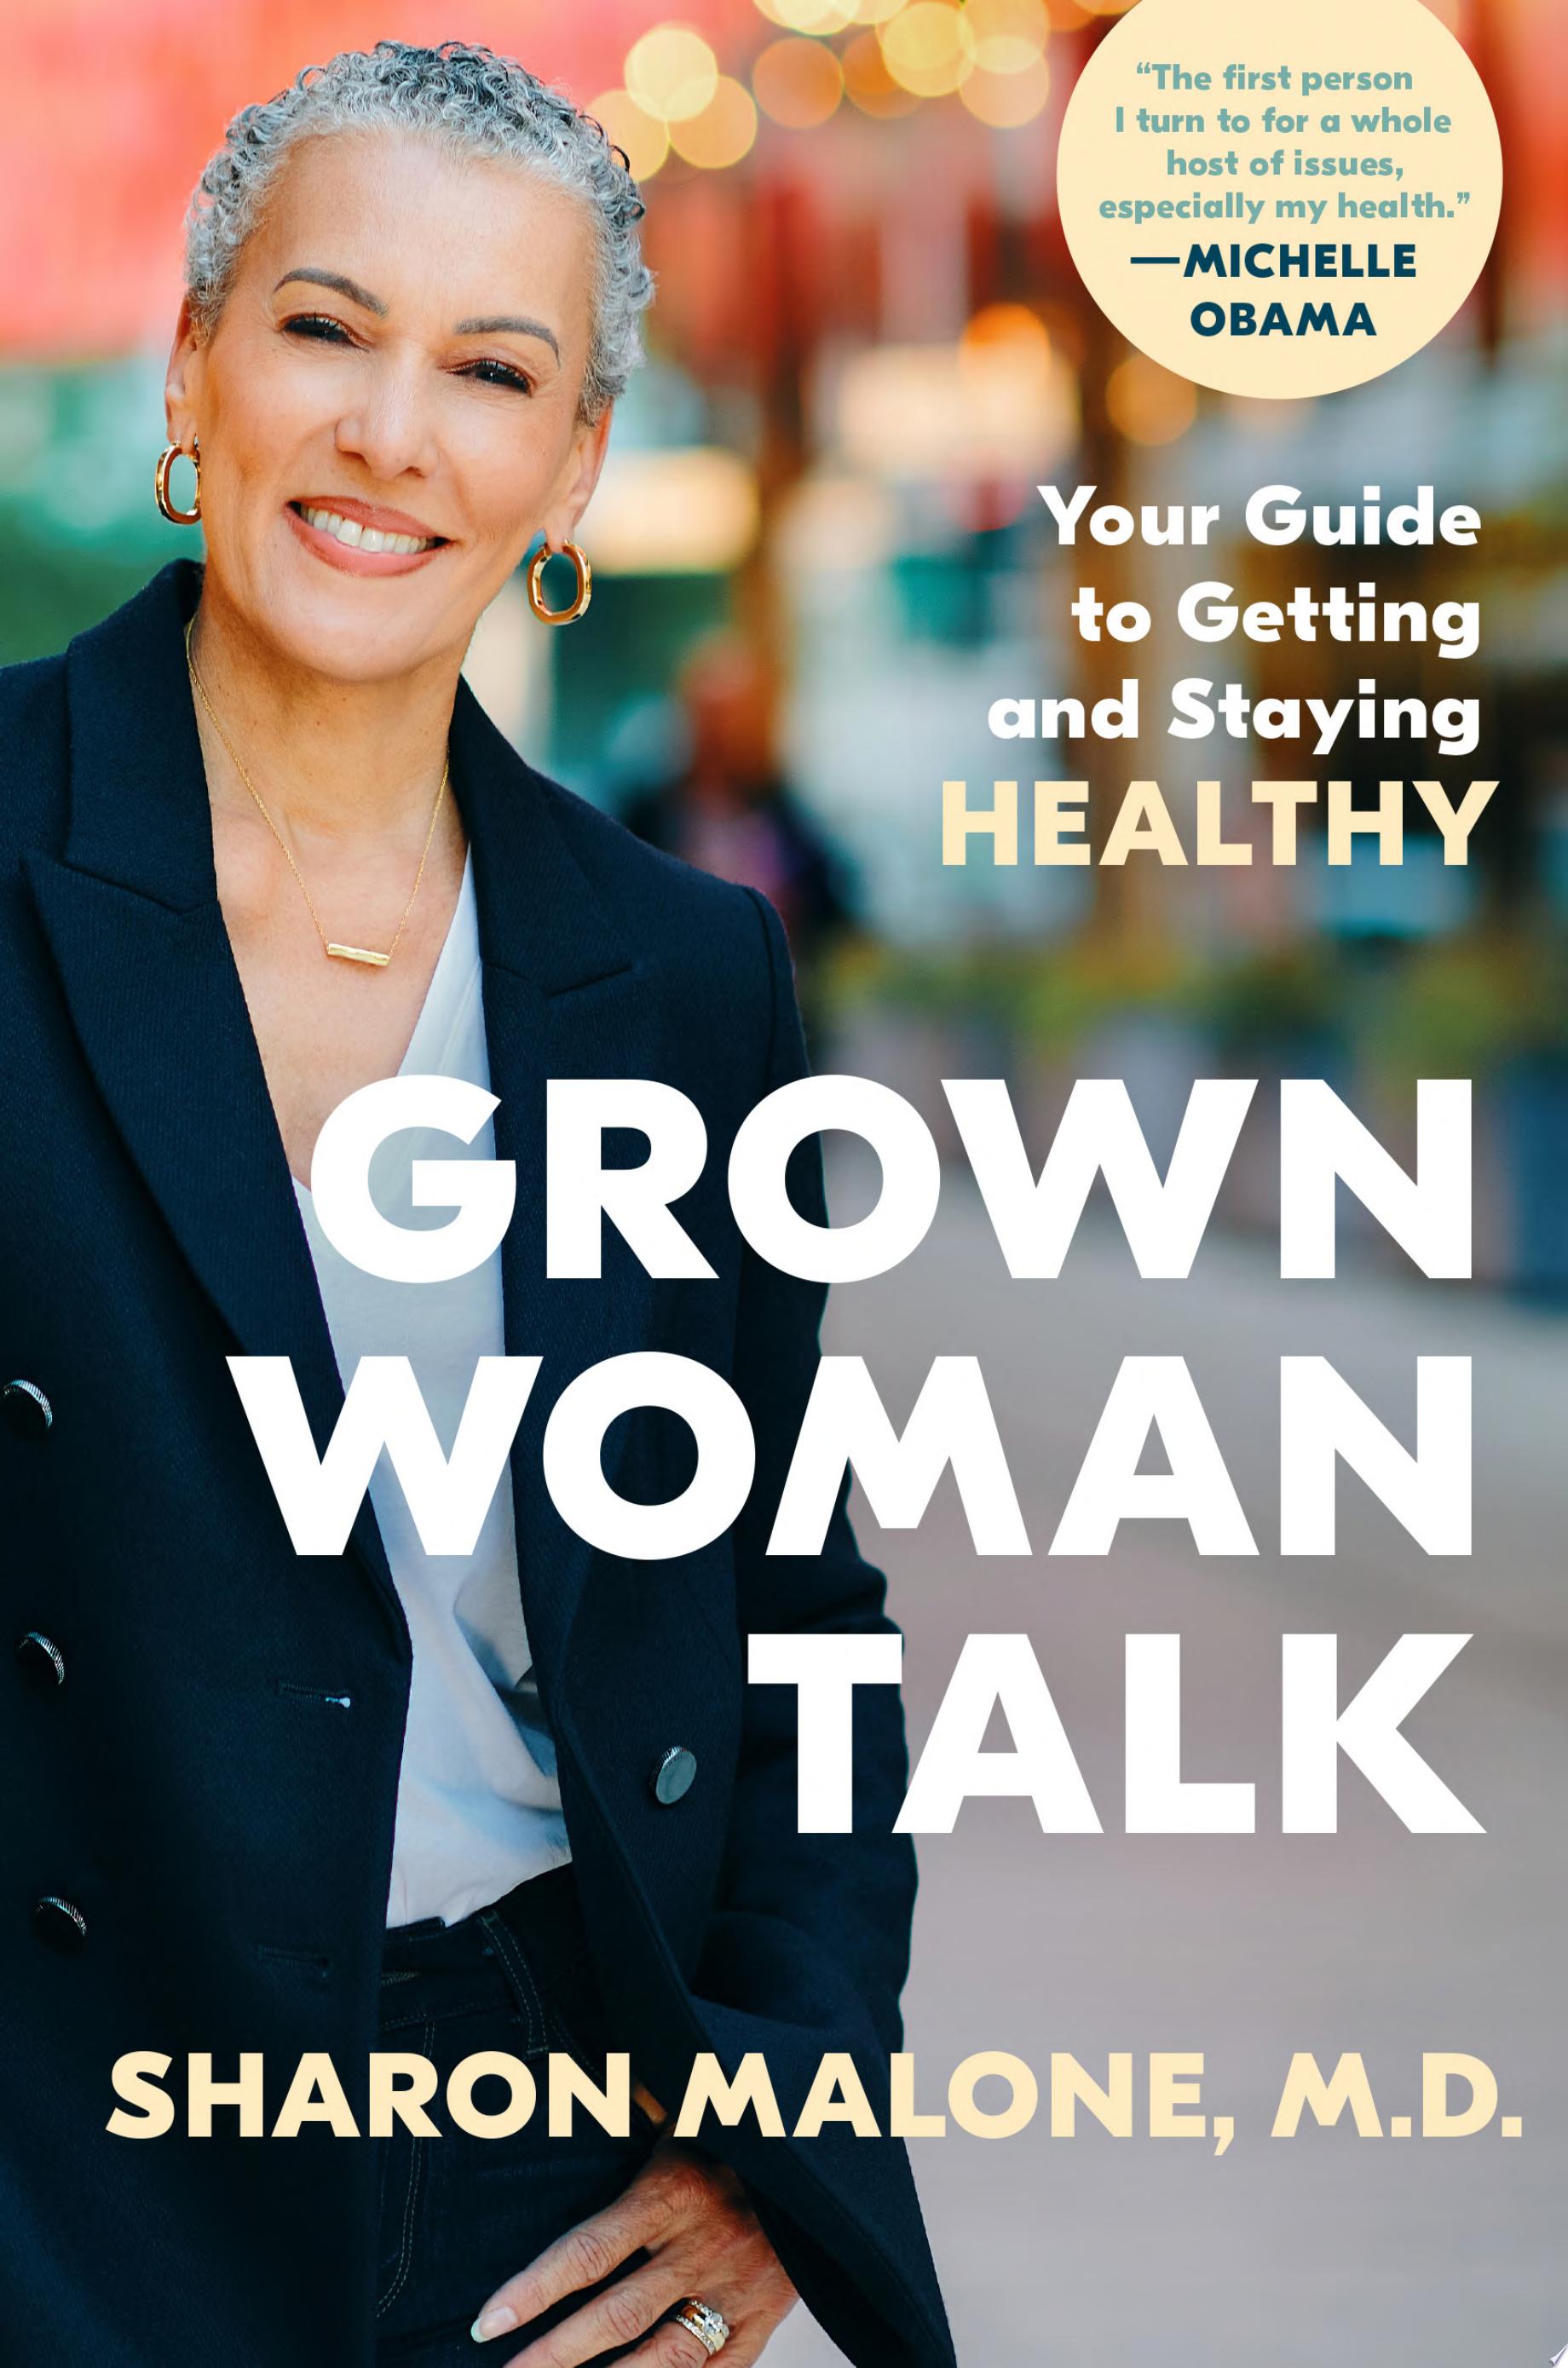 Image for "Grown Woman Talk"